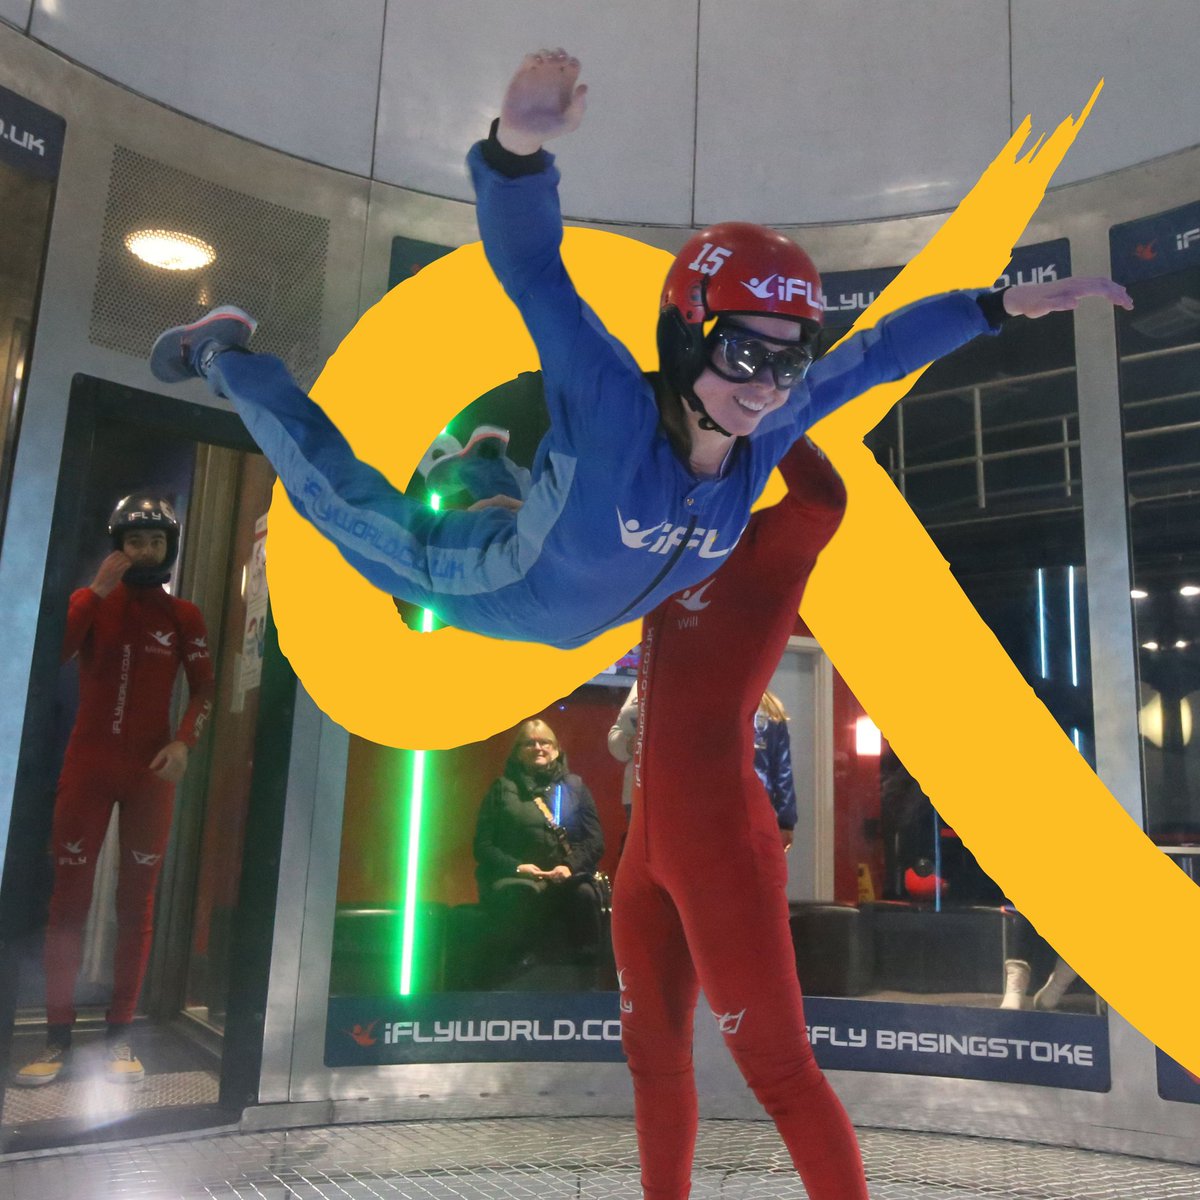 Our young wheelchair users discovered the exhilarating thrill of indoor skydiving at @iFLY_UK Basingstoke! Thanks to iFLY who made sure that everybody had a great time and were able to experience the unforgettable world of indoor skydiving.